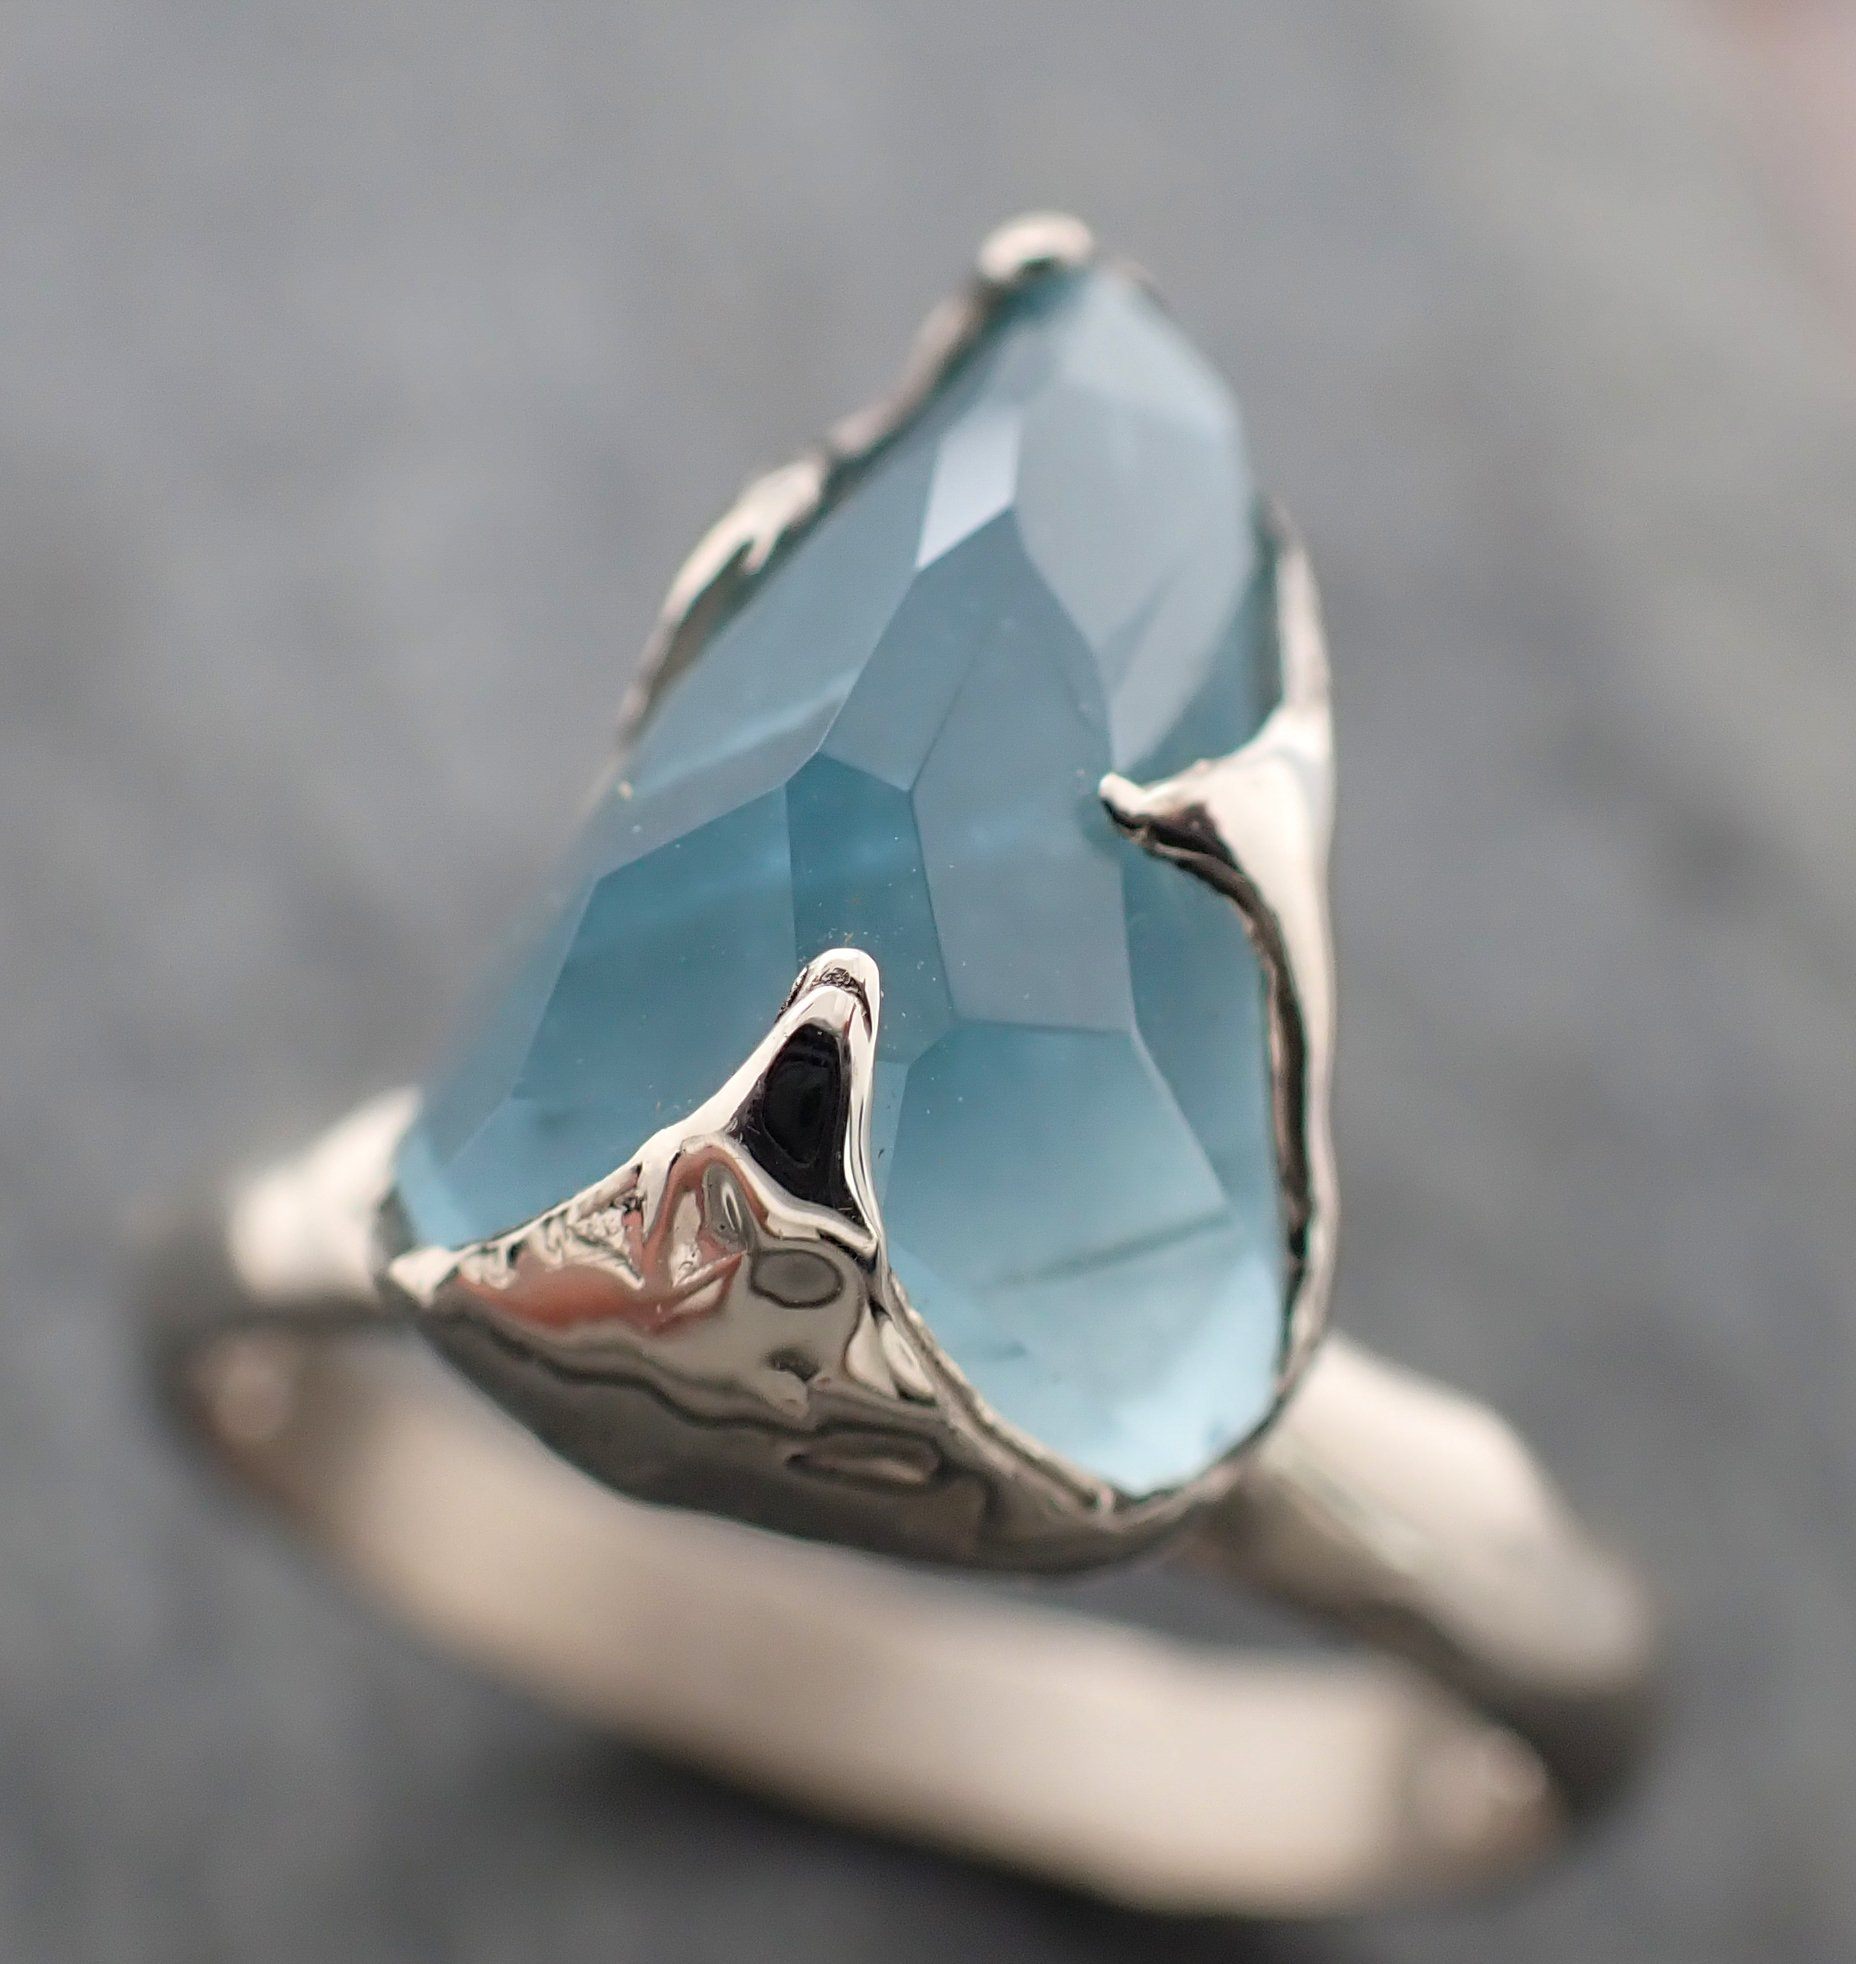 partially faceted aquamarine solitaire ring 14k white gold custom one of a kind gemstone ring bespoke byangeline 2271 Alternative Engagement